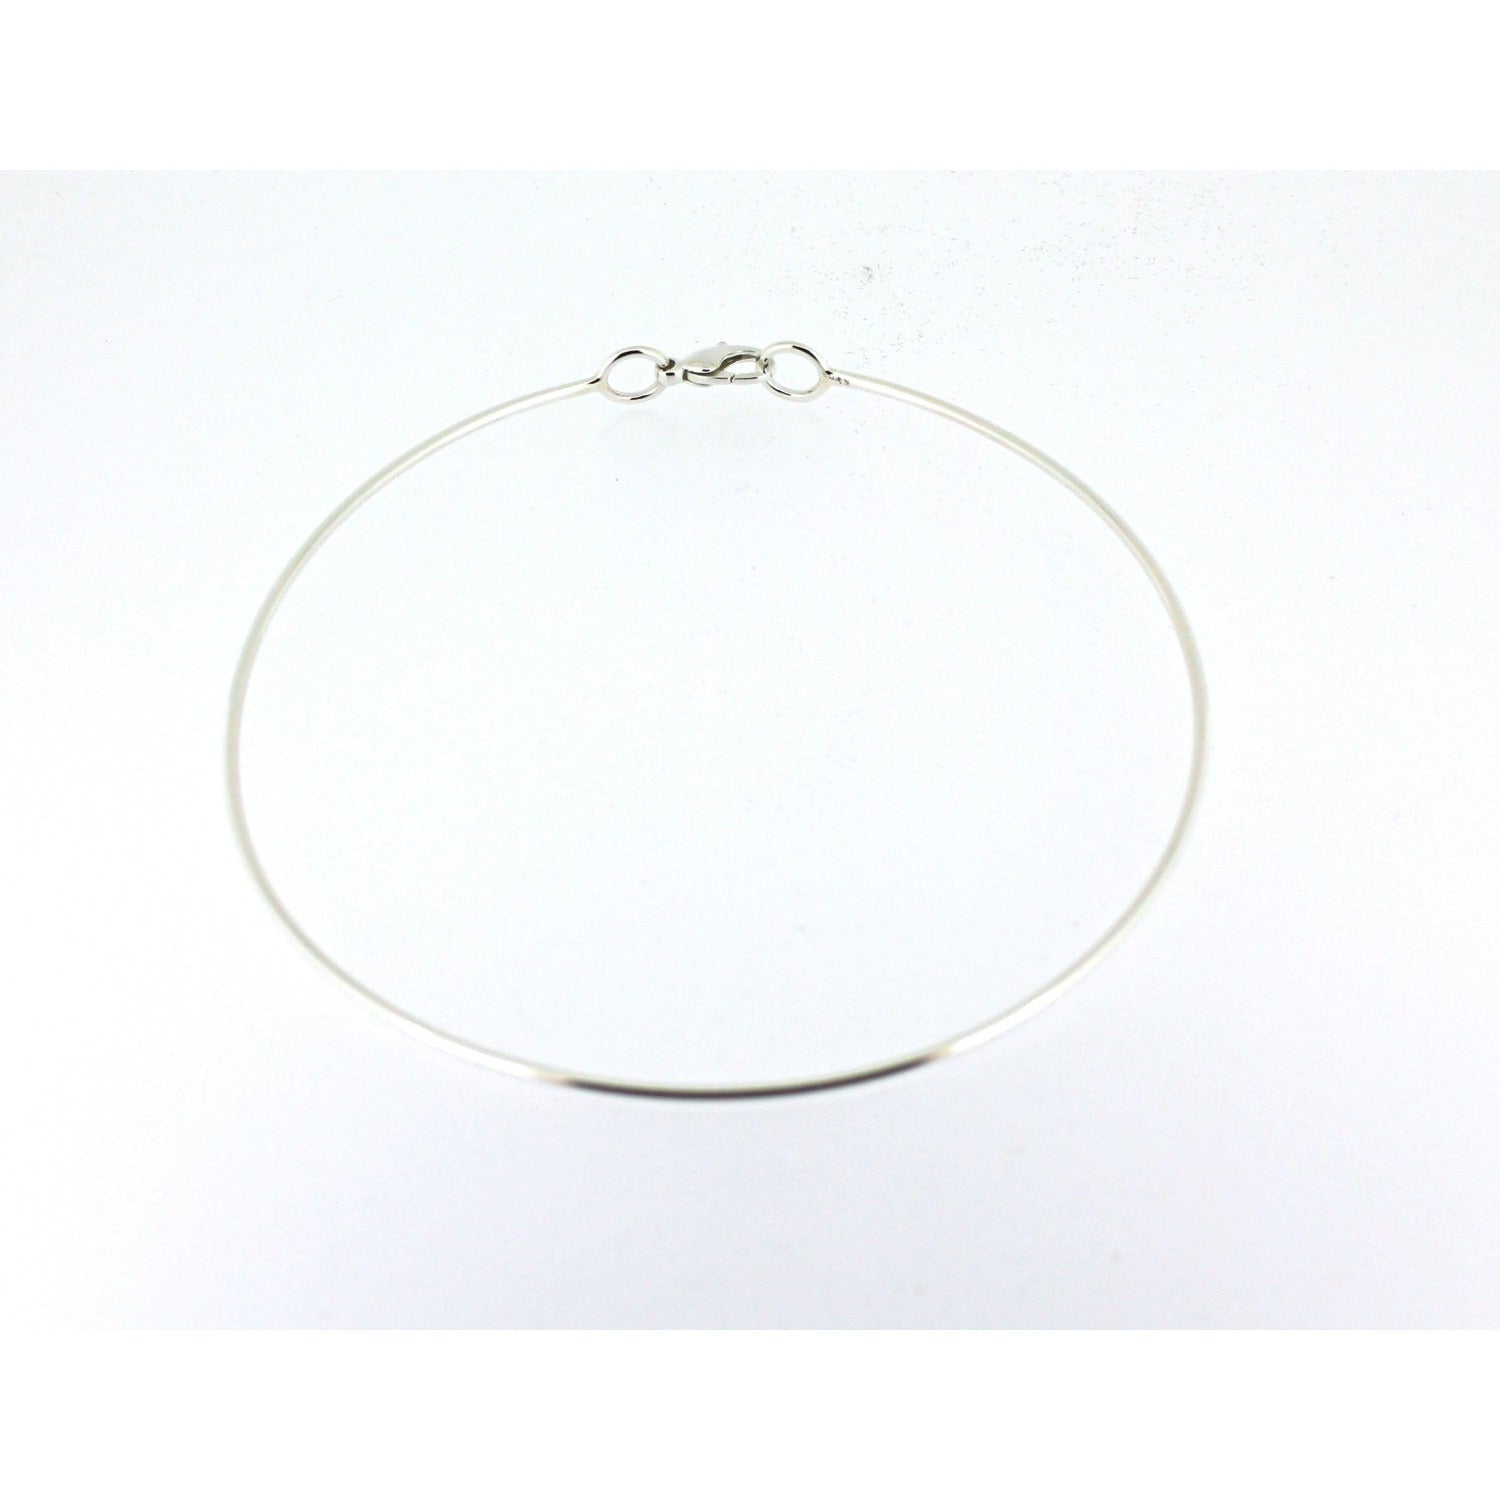 DISCREET DAY COLLAR, STERLING SILVER, CHOKER NECKLACE,UNISEX.